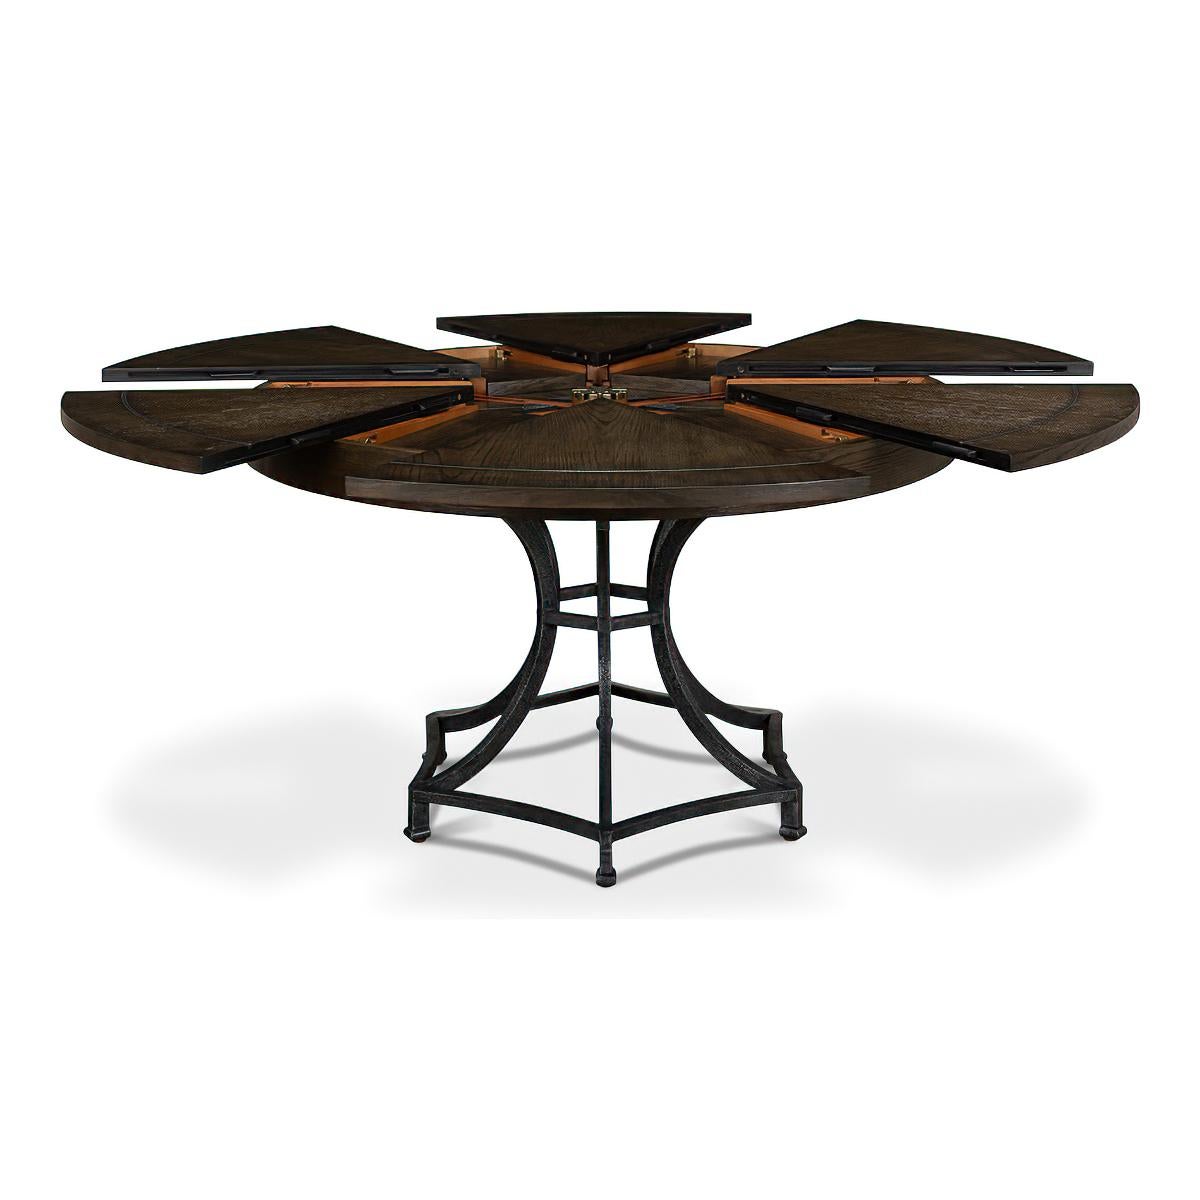 A Modern Industrial style round extending dining table. Featuring a dark brown finish oak top with dark hammered metal inlays on a metal pedestal column base.

Open dimensions: 70